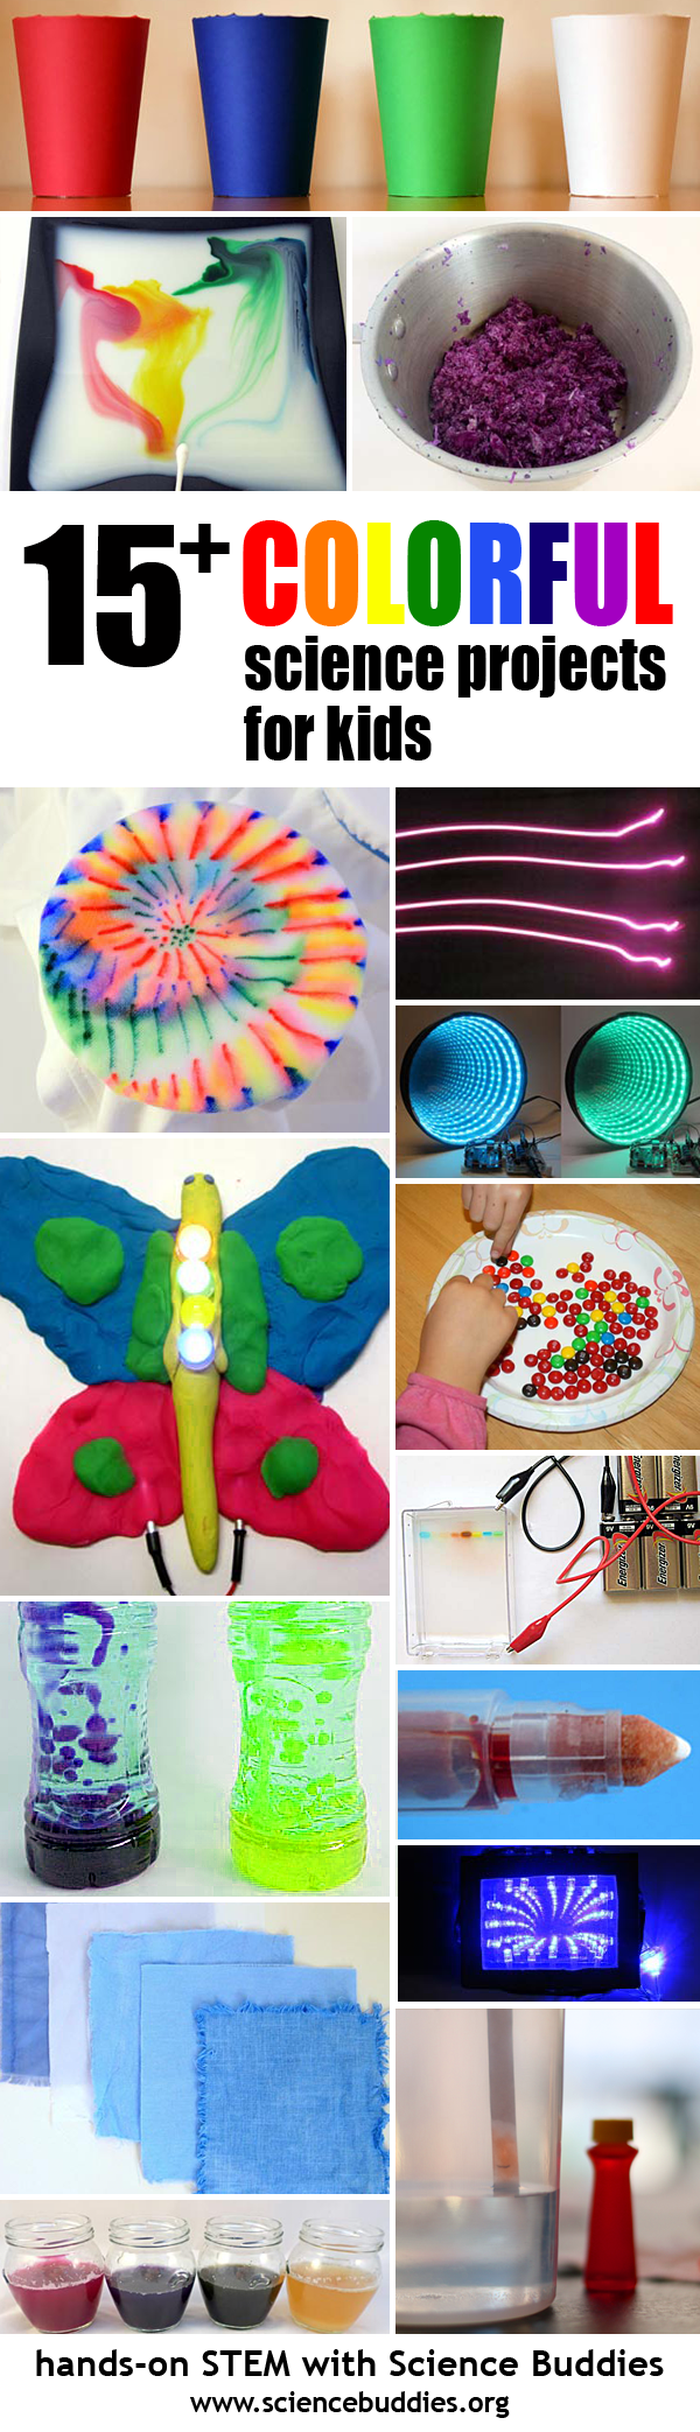 Photo collage of fifteen science projects based on color